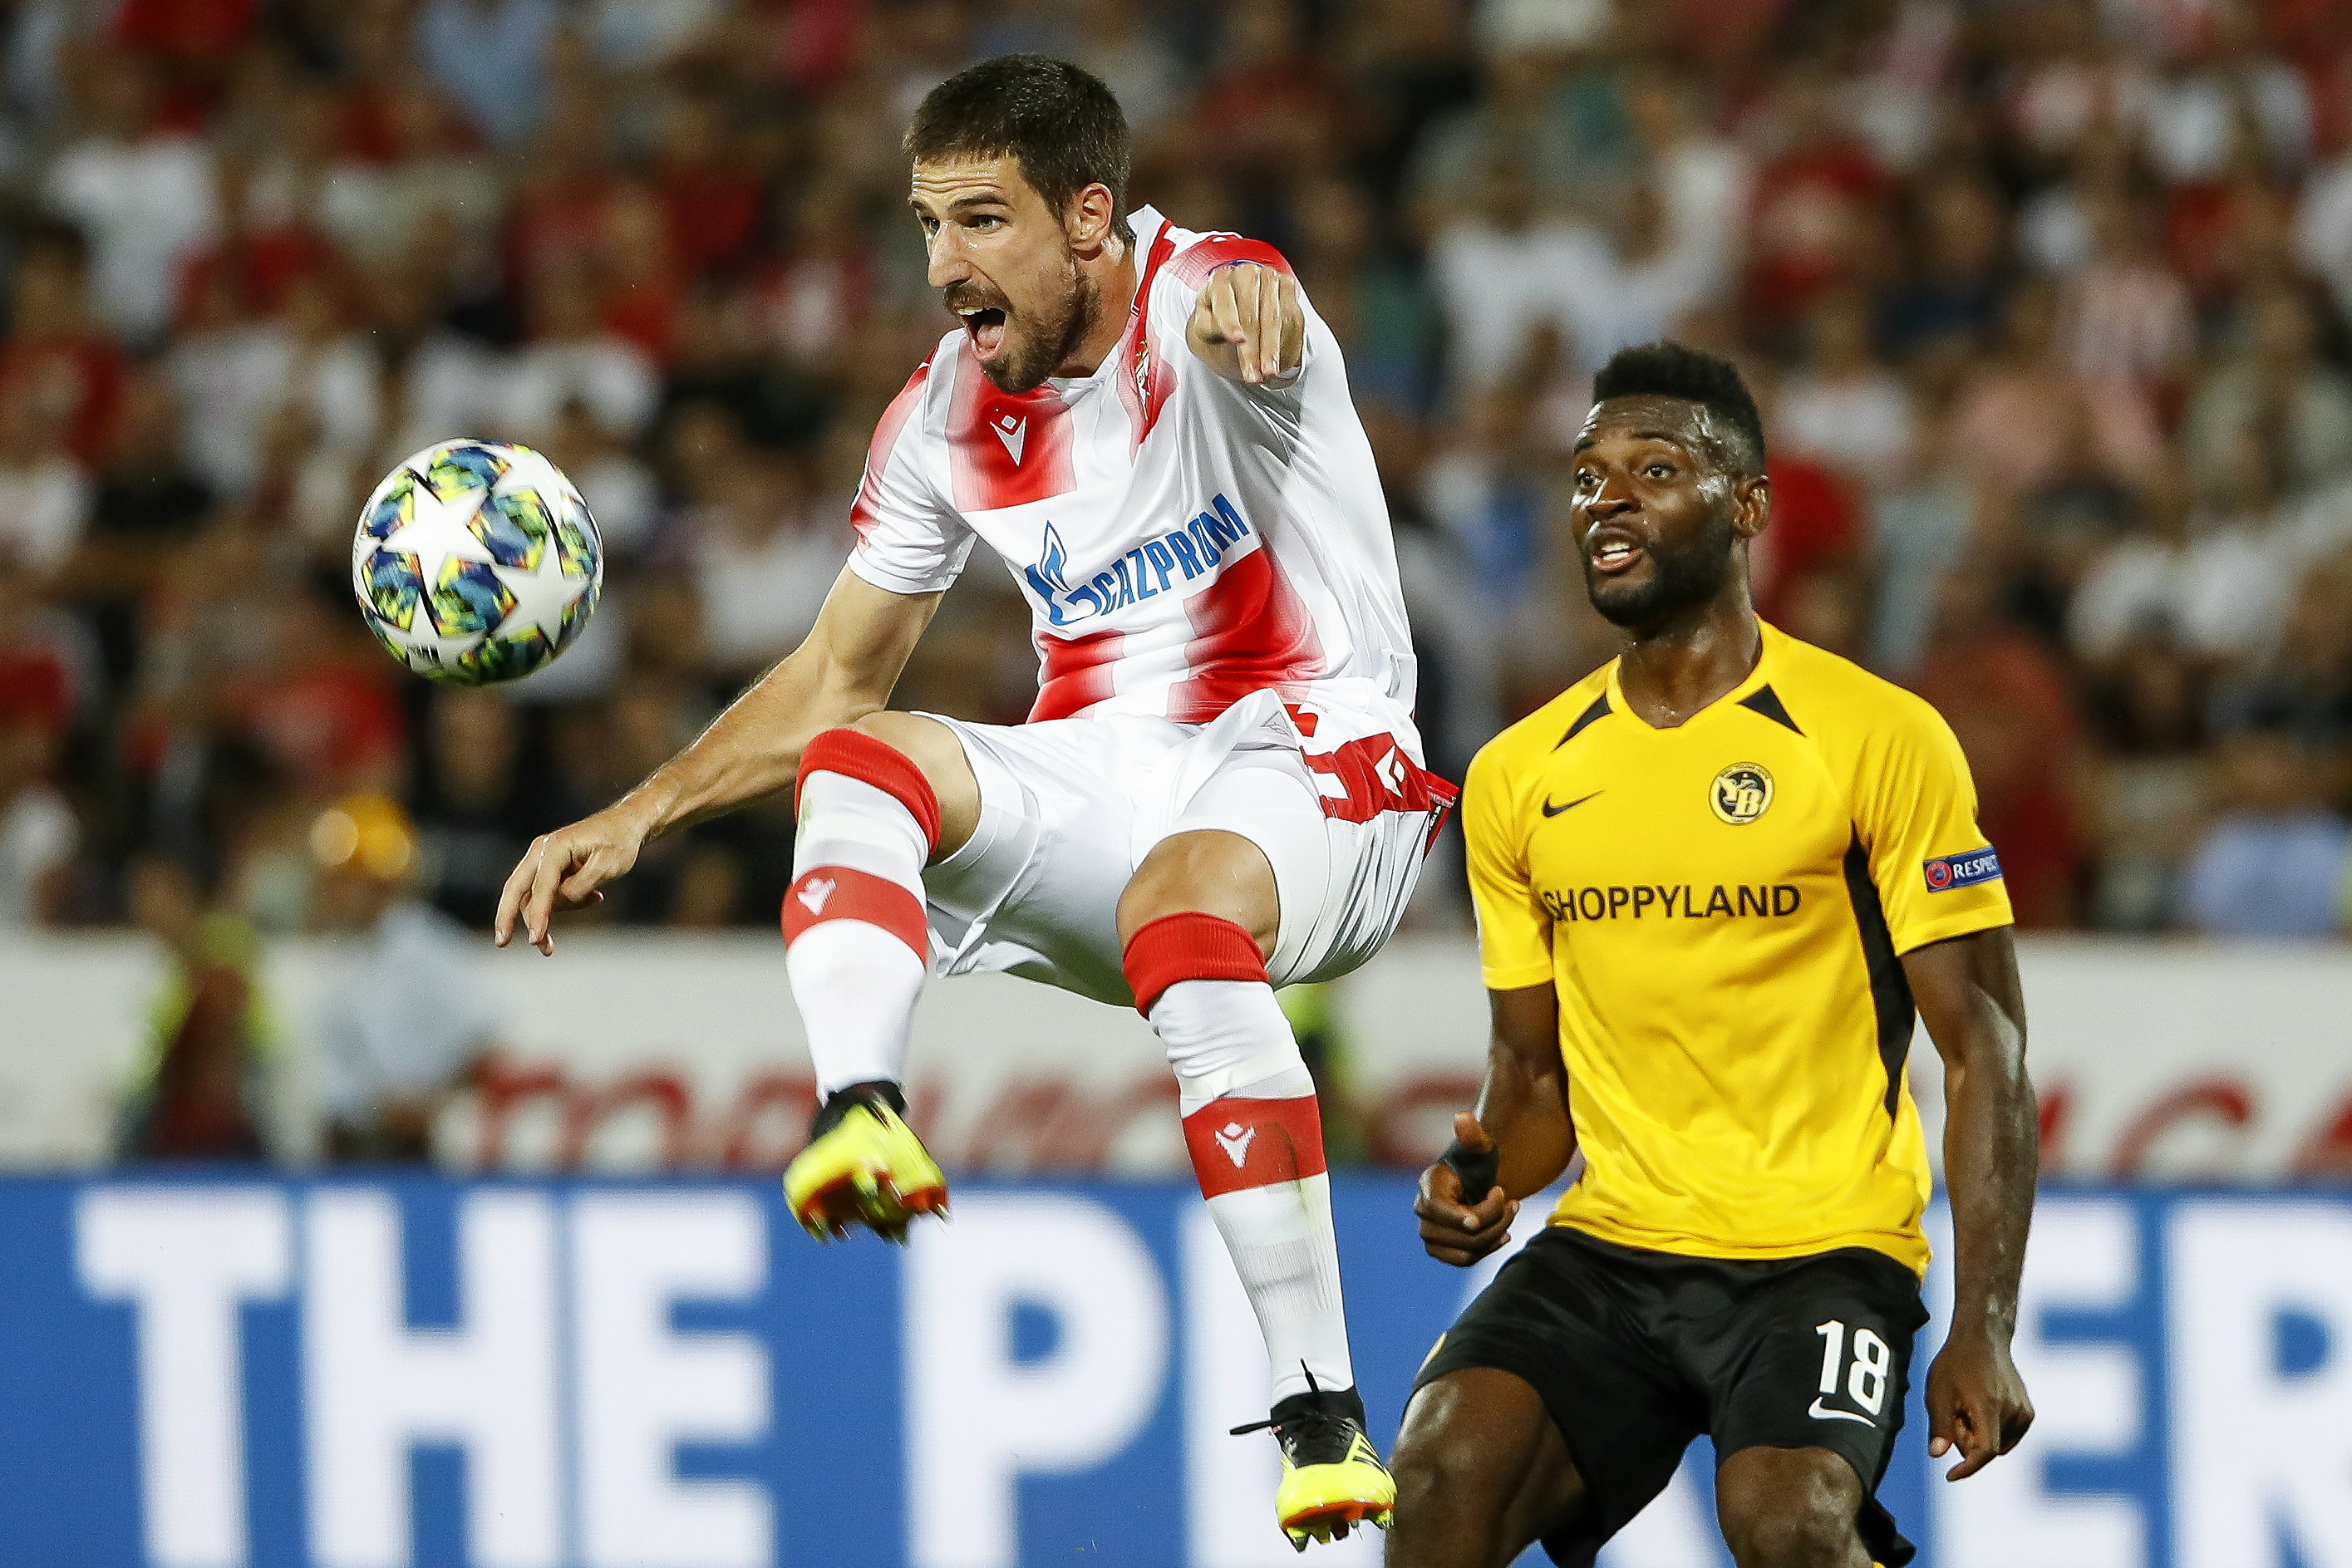 Milos Degenek had a superb game in defence to help Red Star qualify for the Champions League